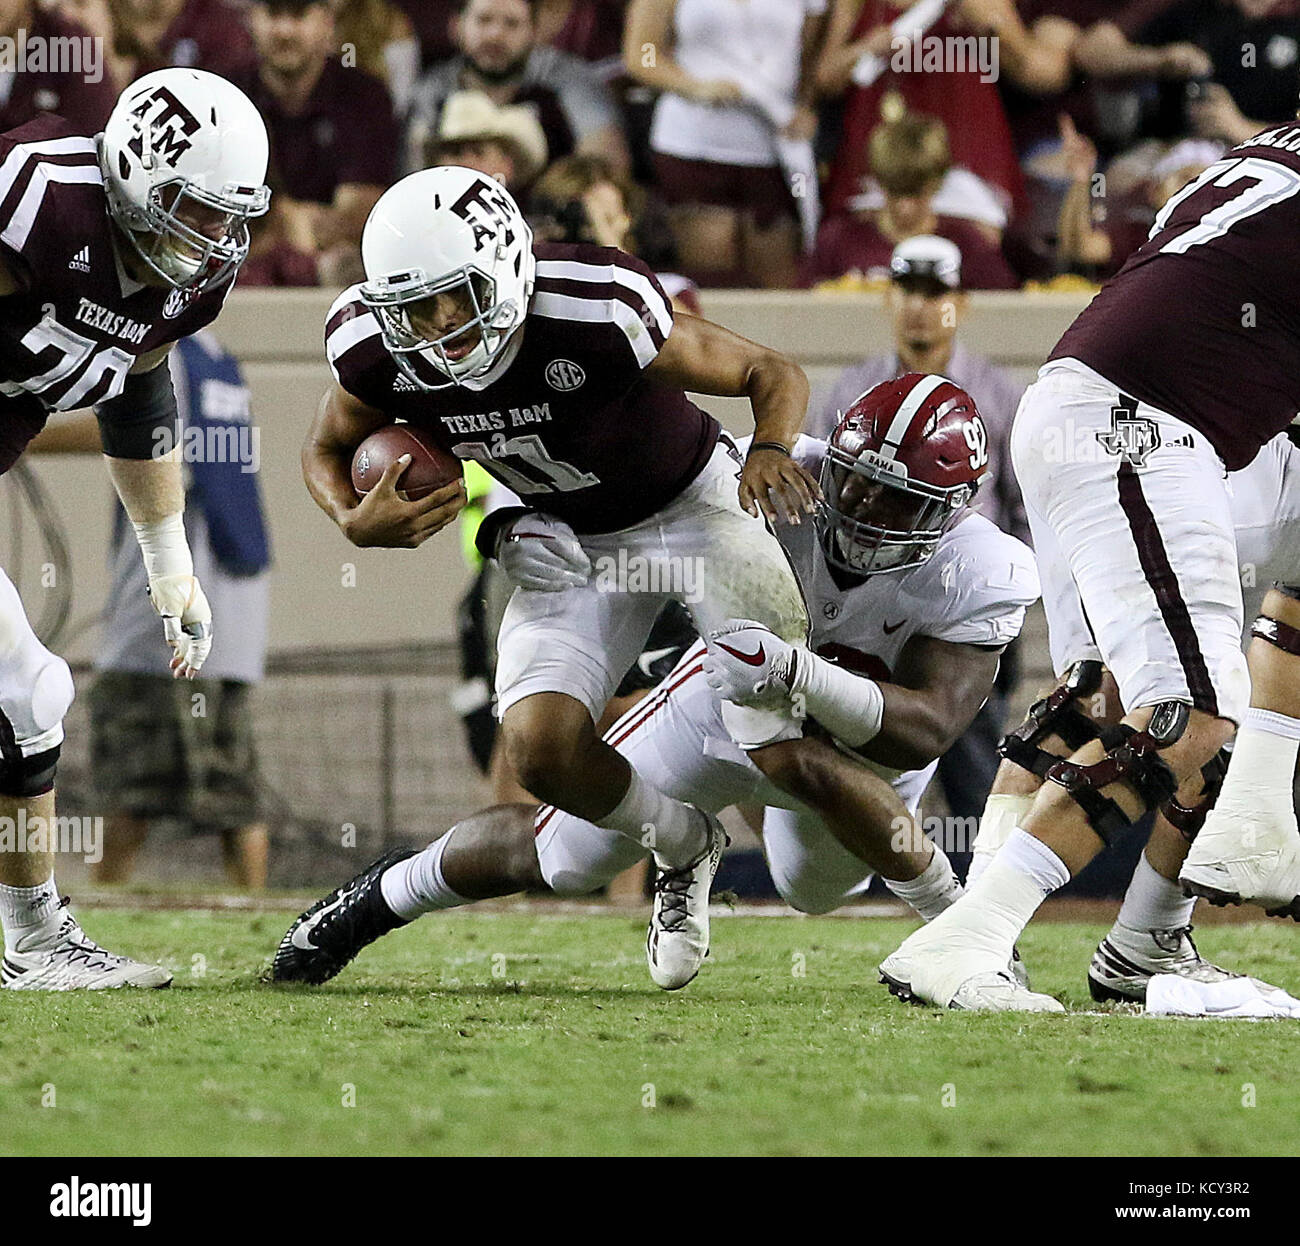 October 6, 2017: Texas A&M Aggies quarterback Kellen Mond (11) is tackled by Alabama Crimson Tide defensive lineman Quinnen Williams (92) in the fourth quarter during the NCAA football game between the Alabama Crimson Tide and the Texas A&M Aggies at Kyle Field in College Station, TX; John Glaser/CSM. Stock Photo